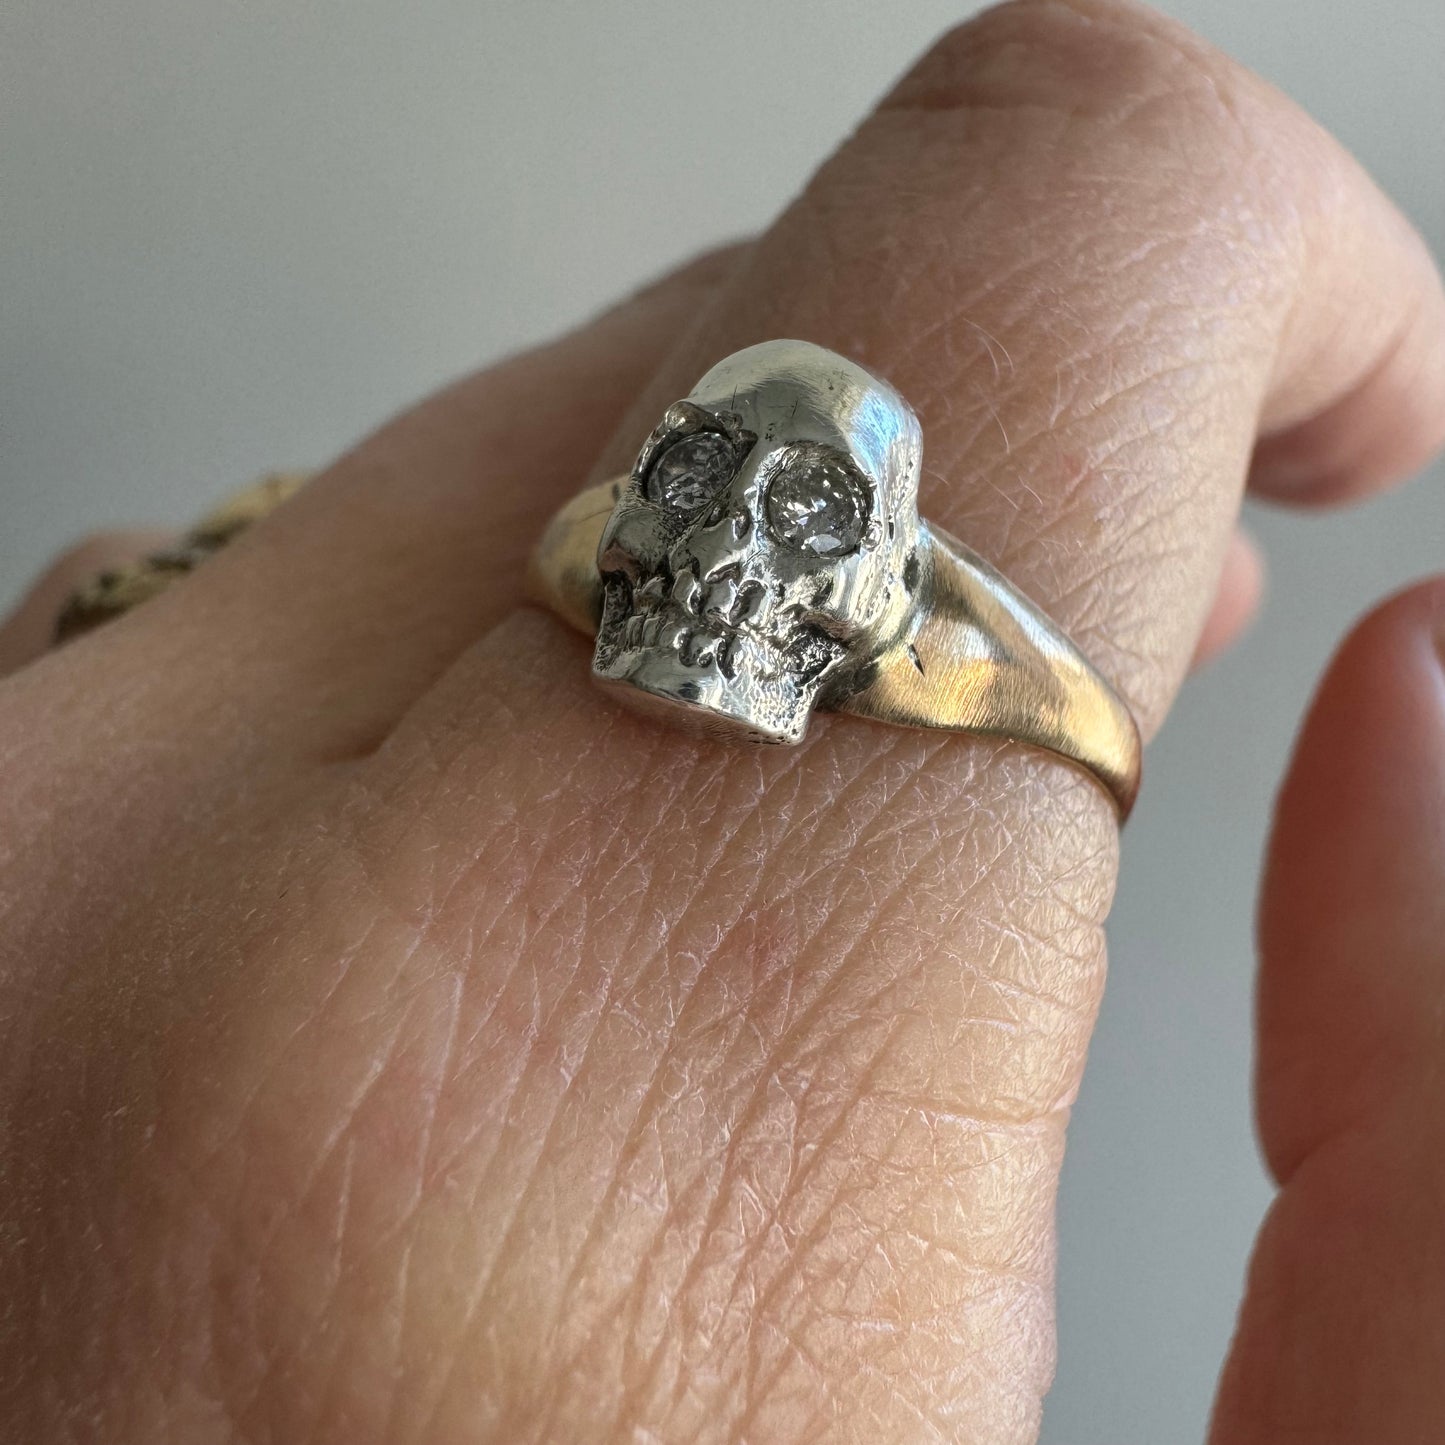 reimagined V I N T A G E // bicolor Memento Mori / 9ct and sterling silver signet ring with diamonds / a skull ring / size 7 to 7.25